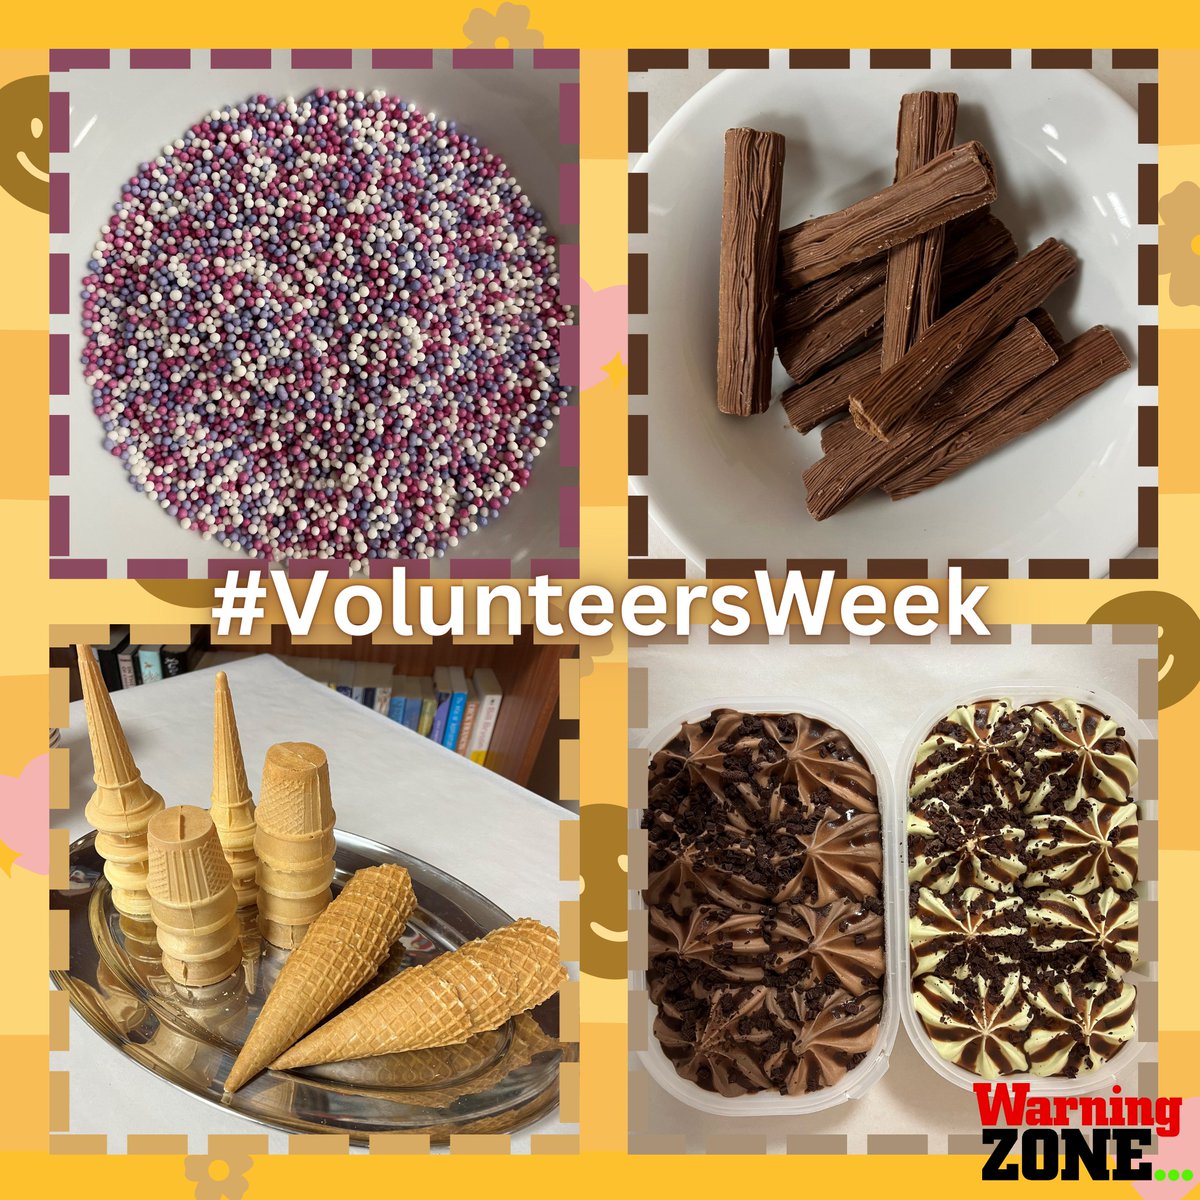 Our wonderful volunteers are being treated to some delicious ice cream this week 🍨 🍦 💚 #VolunteersWeek To find out how to join us, please visit 👇 warningzone.org.uk/volunteer